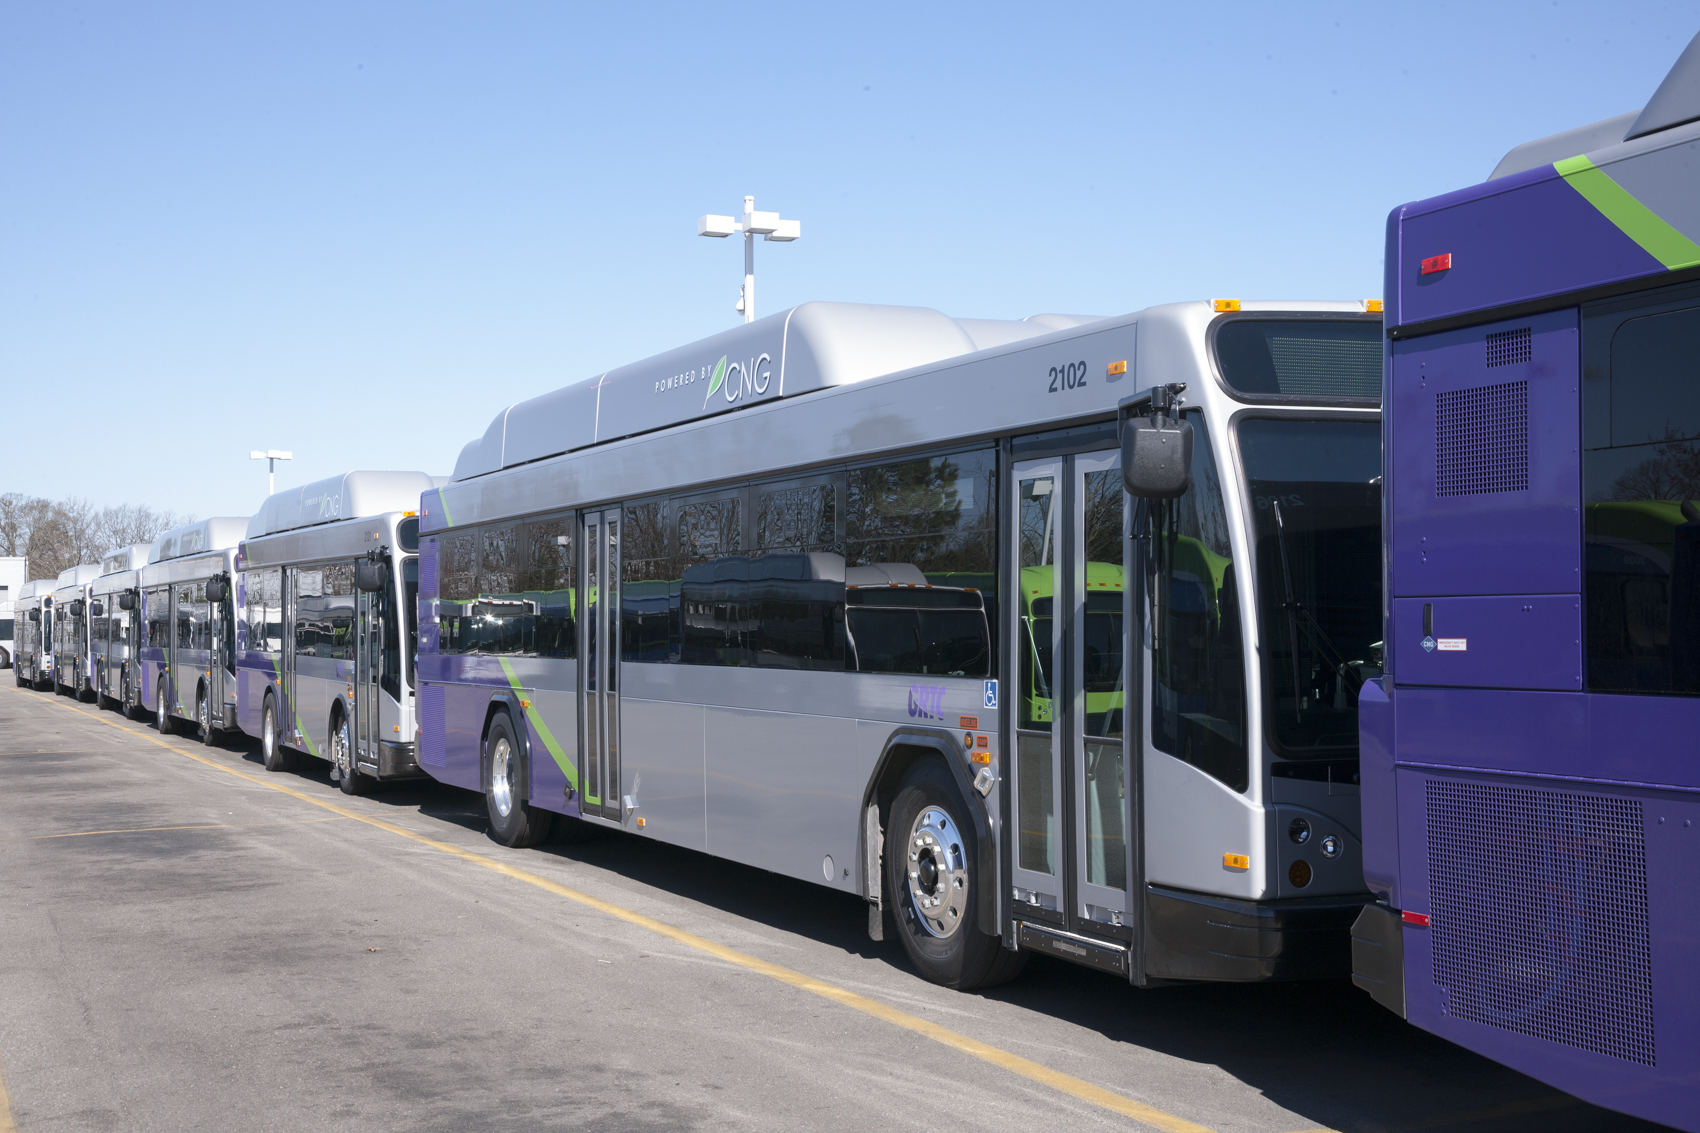 Free bus rides will continue under newly approved GRTC budget